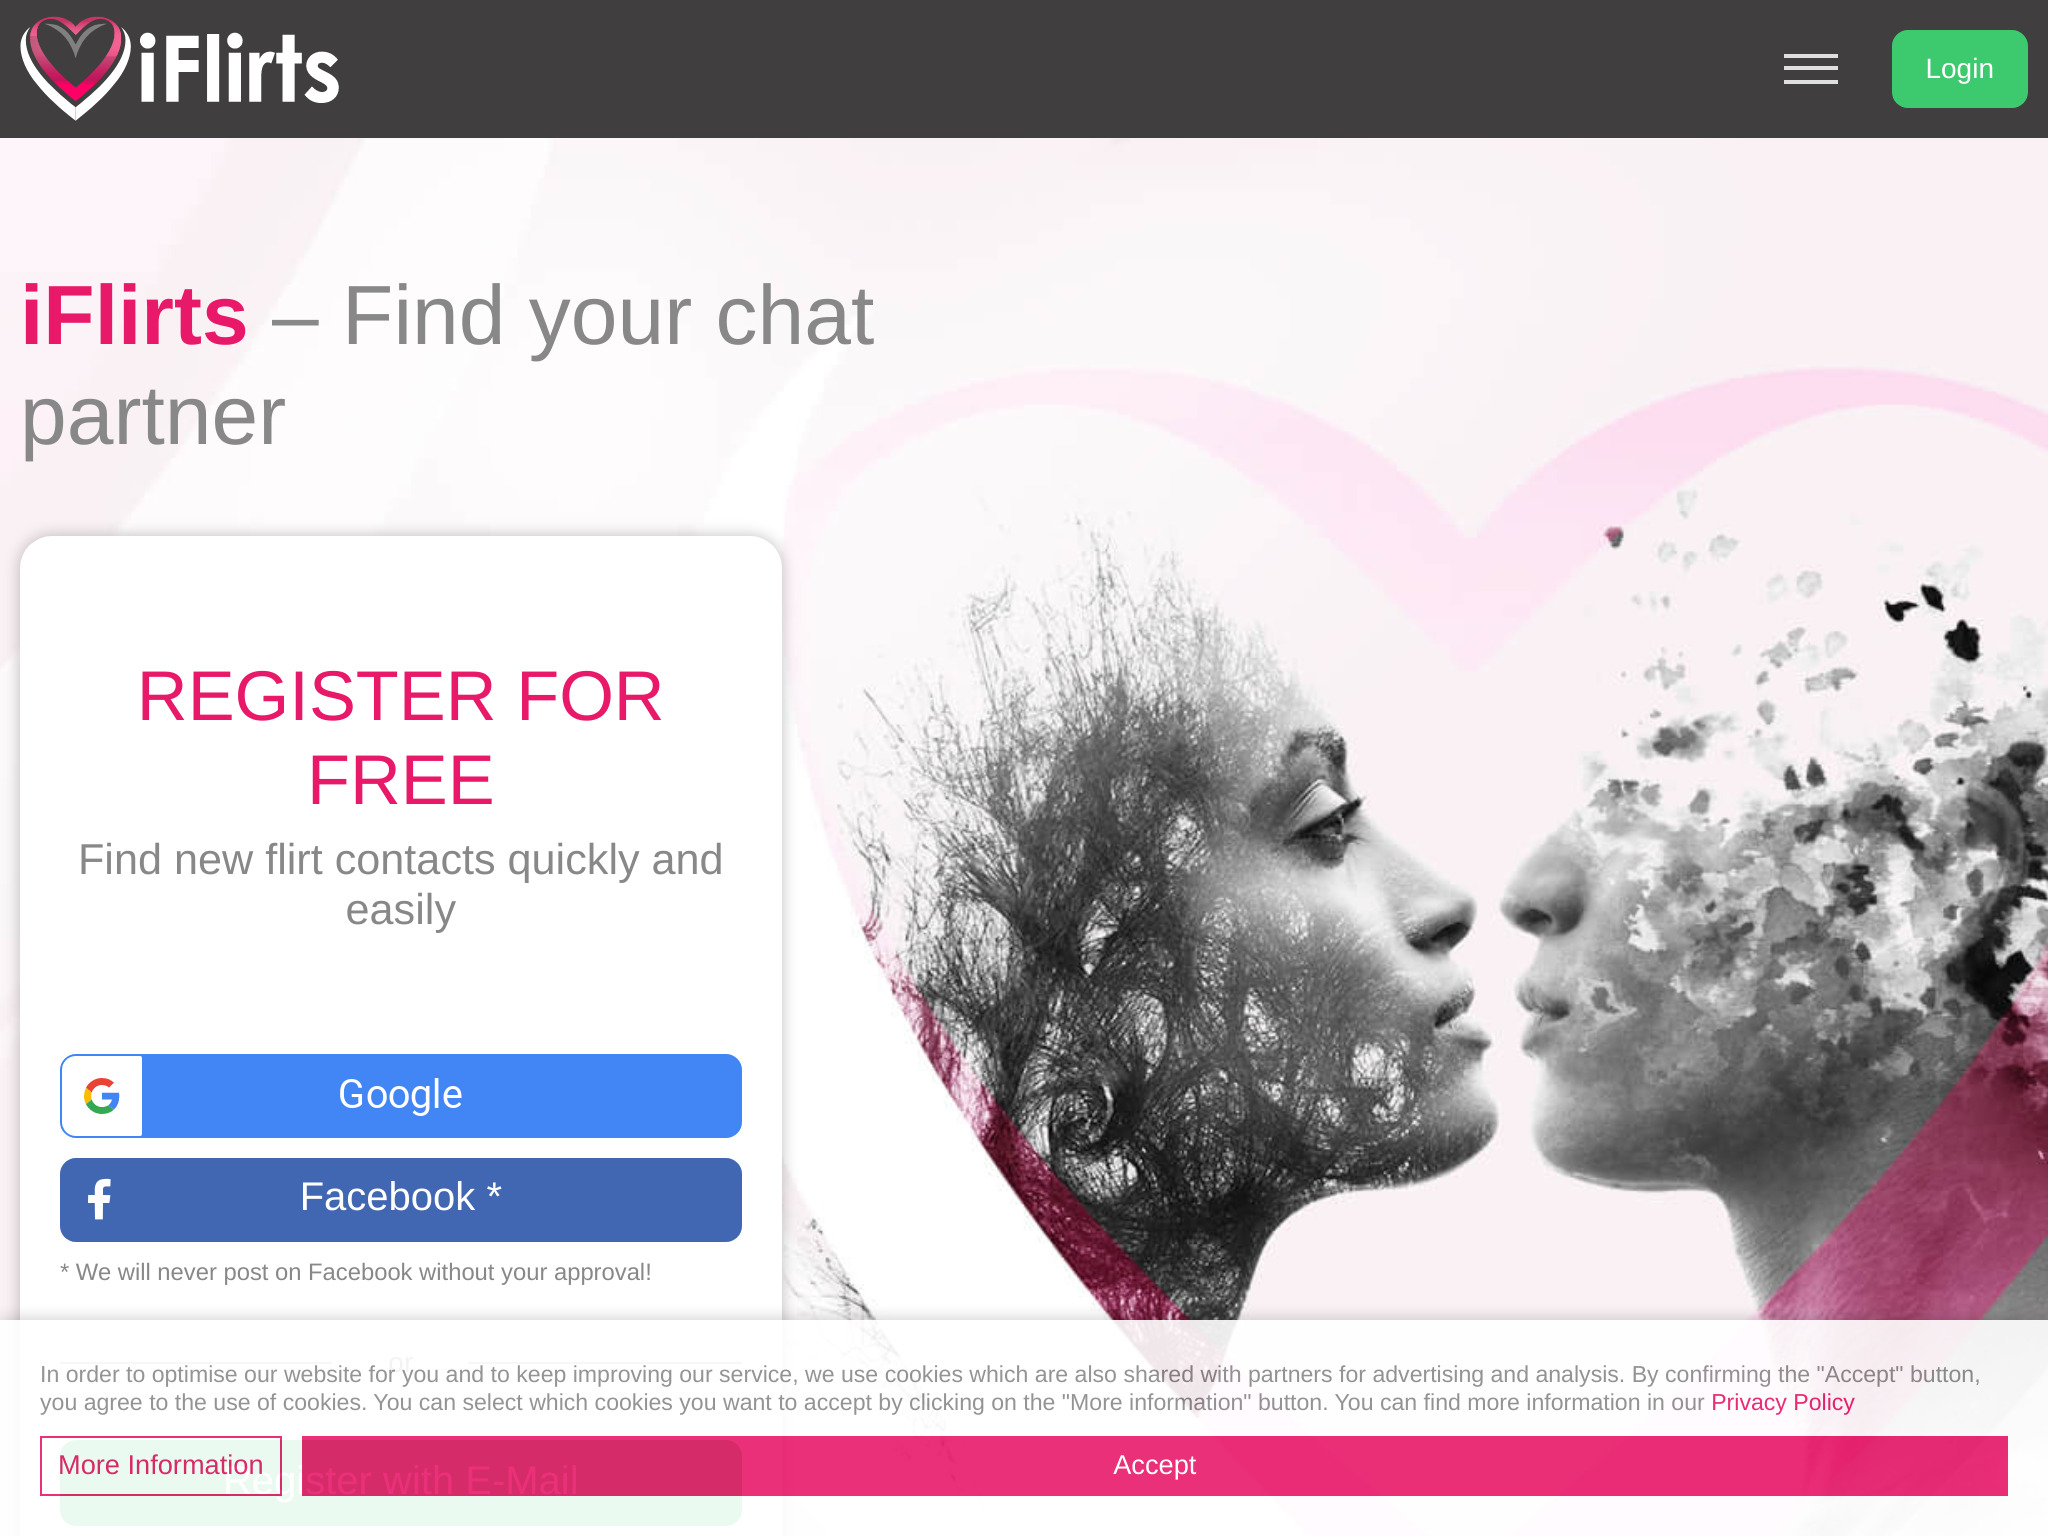 iflirts Review: An Honest Look at What It Offers